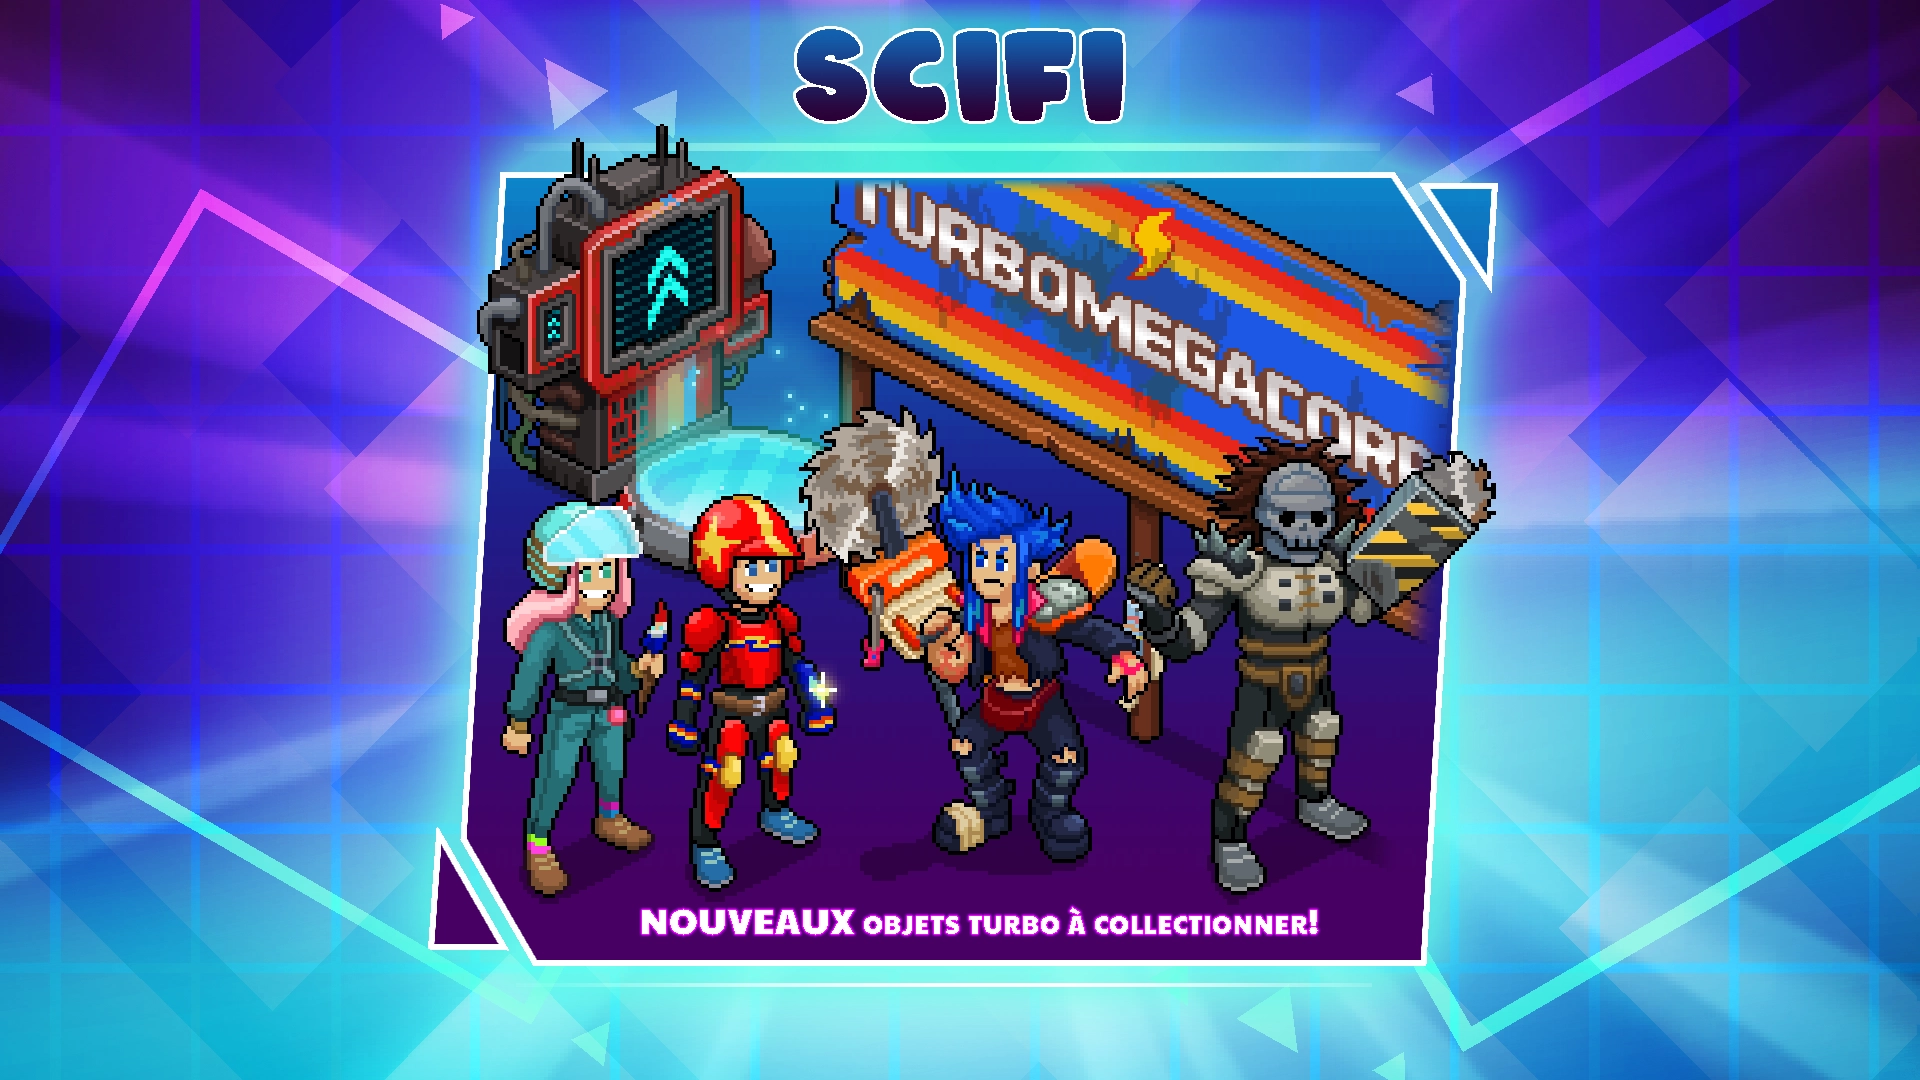 The image shows the new items added to the Pewdiepie’s Tuber Simulator SciFi x Turbo Kid Update: Teleport Pod, Apple, Becca, Skeletron, Turbo Kid, and Turbomega Corp. Billboard.